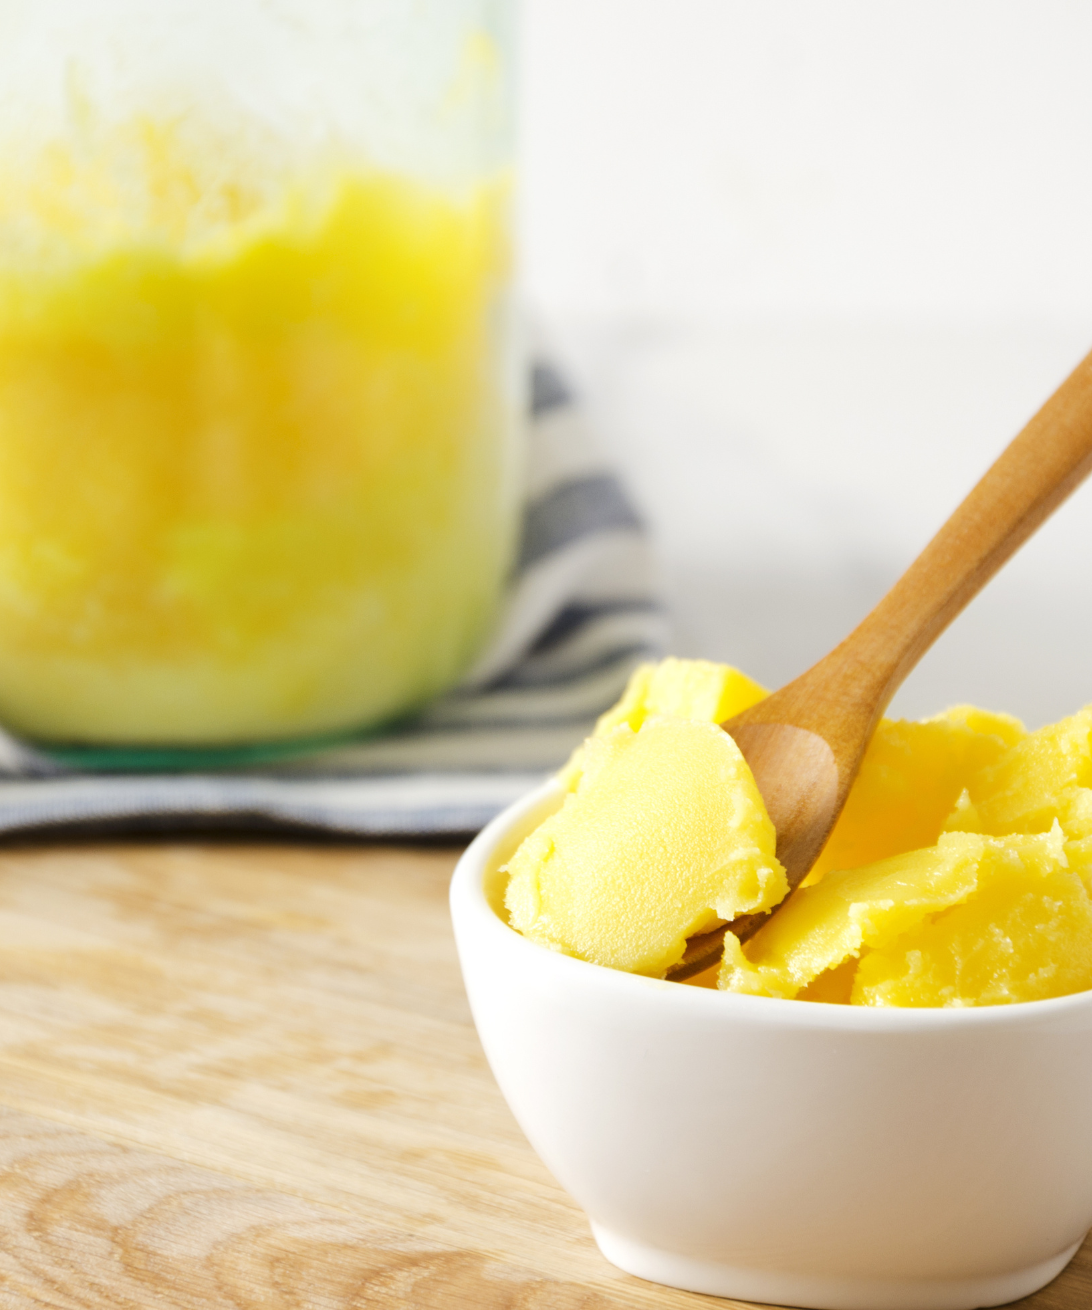 What Are The Differences Between Butter and Ghee?